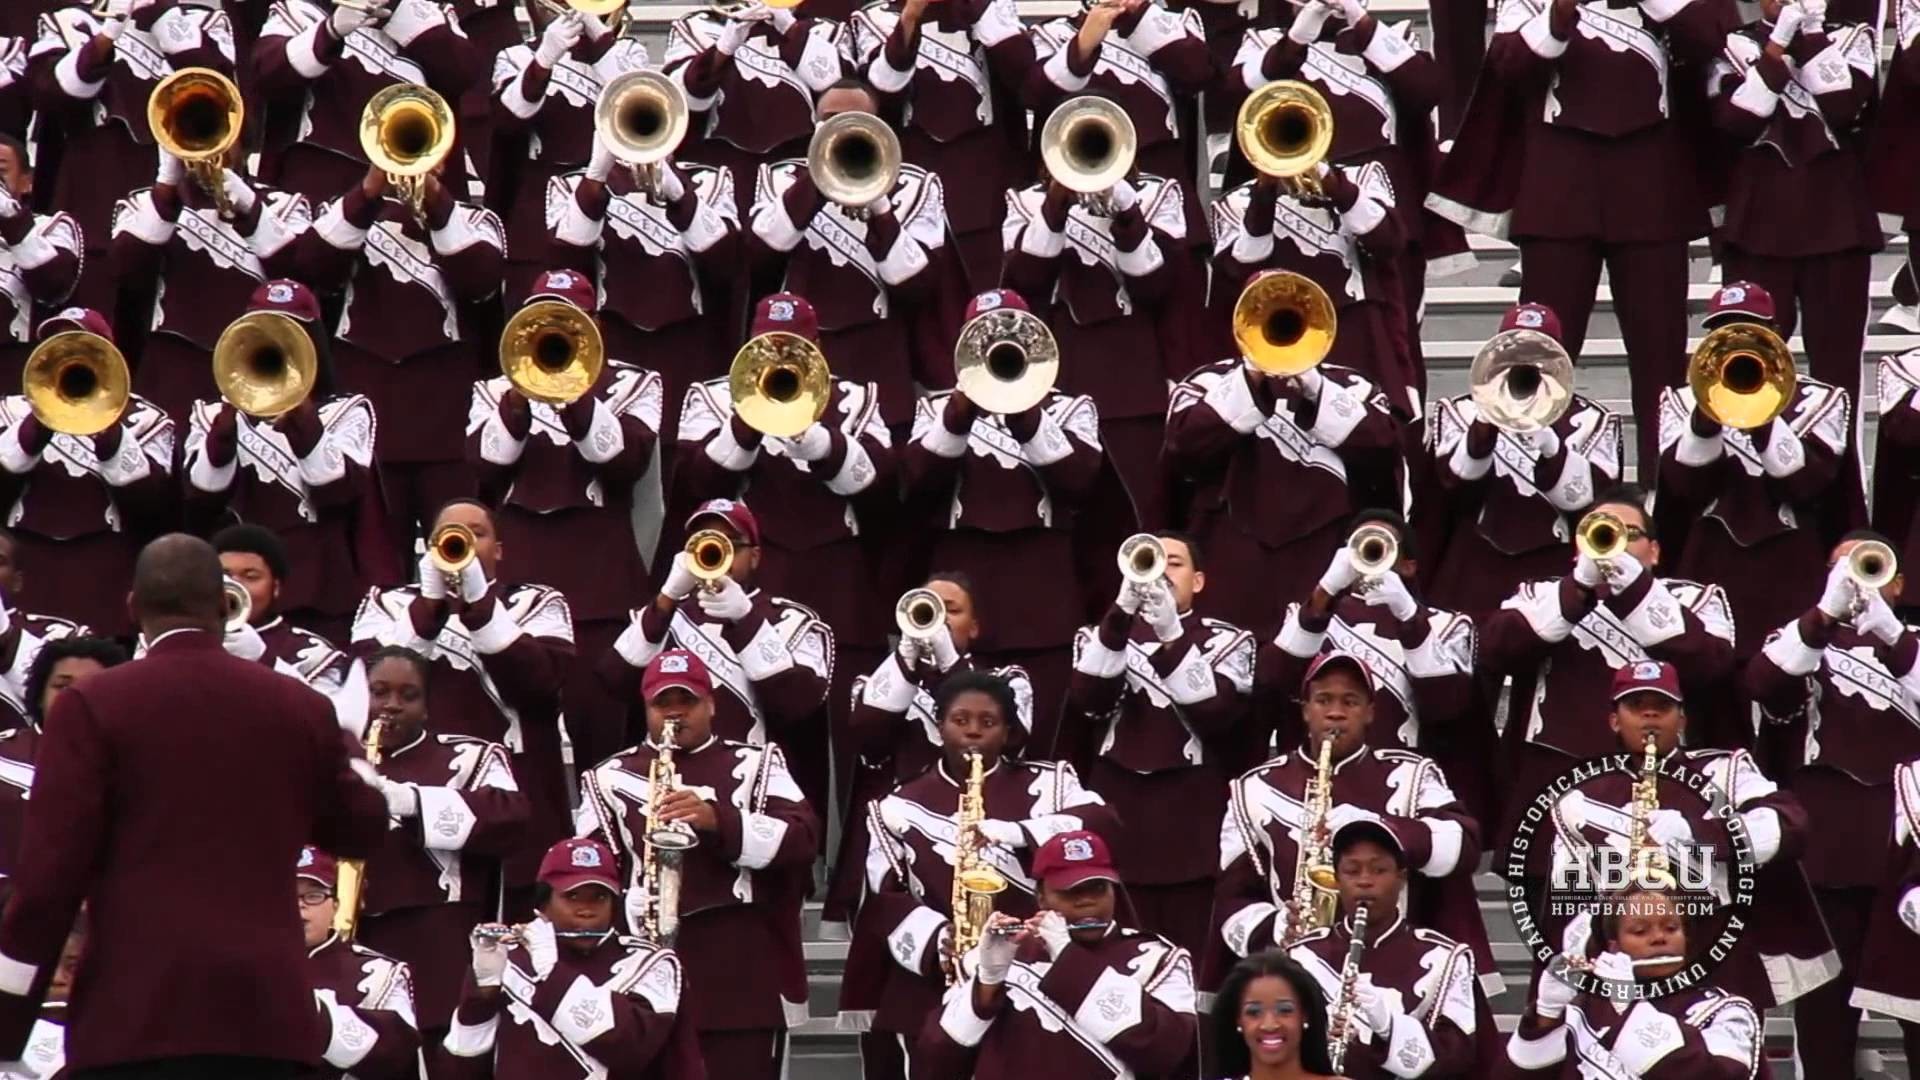 1920x1080 Skin I'm In - Texas Southern Marching Band (2011)